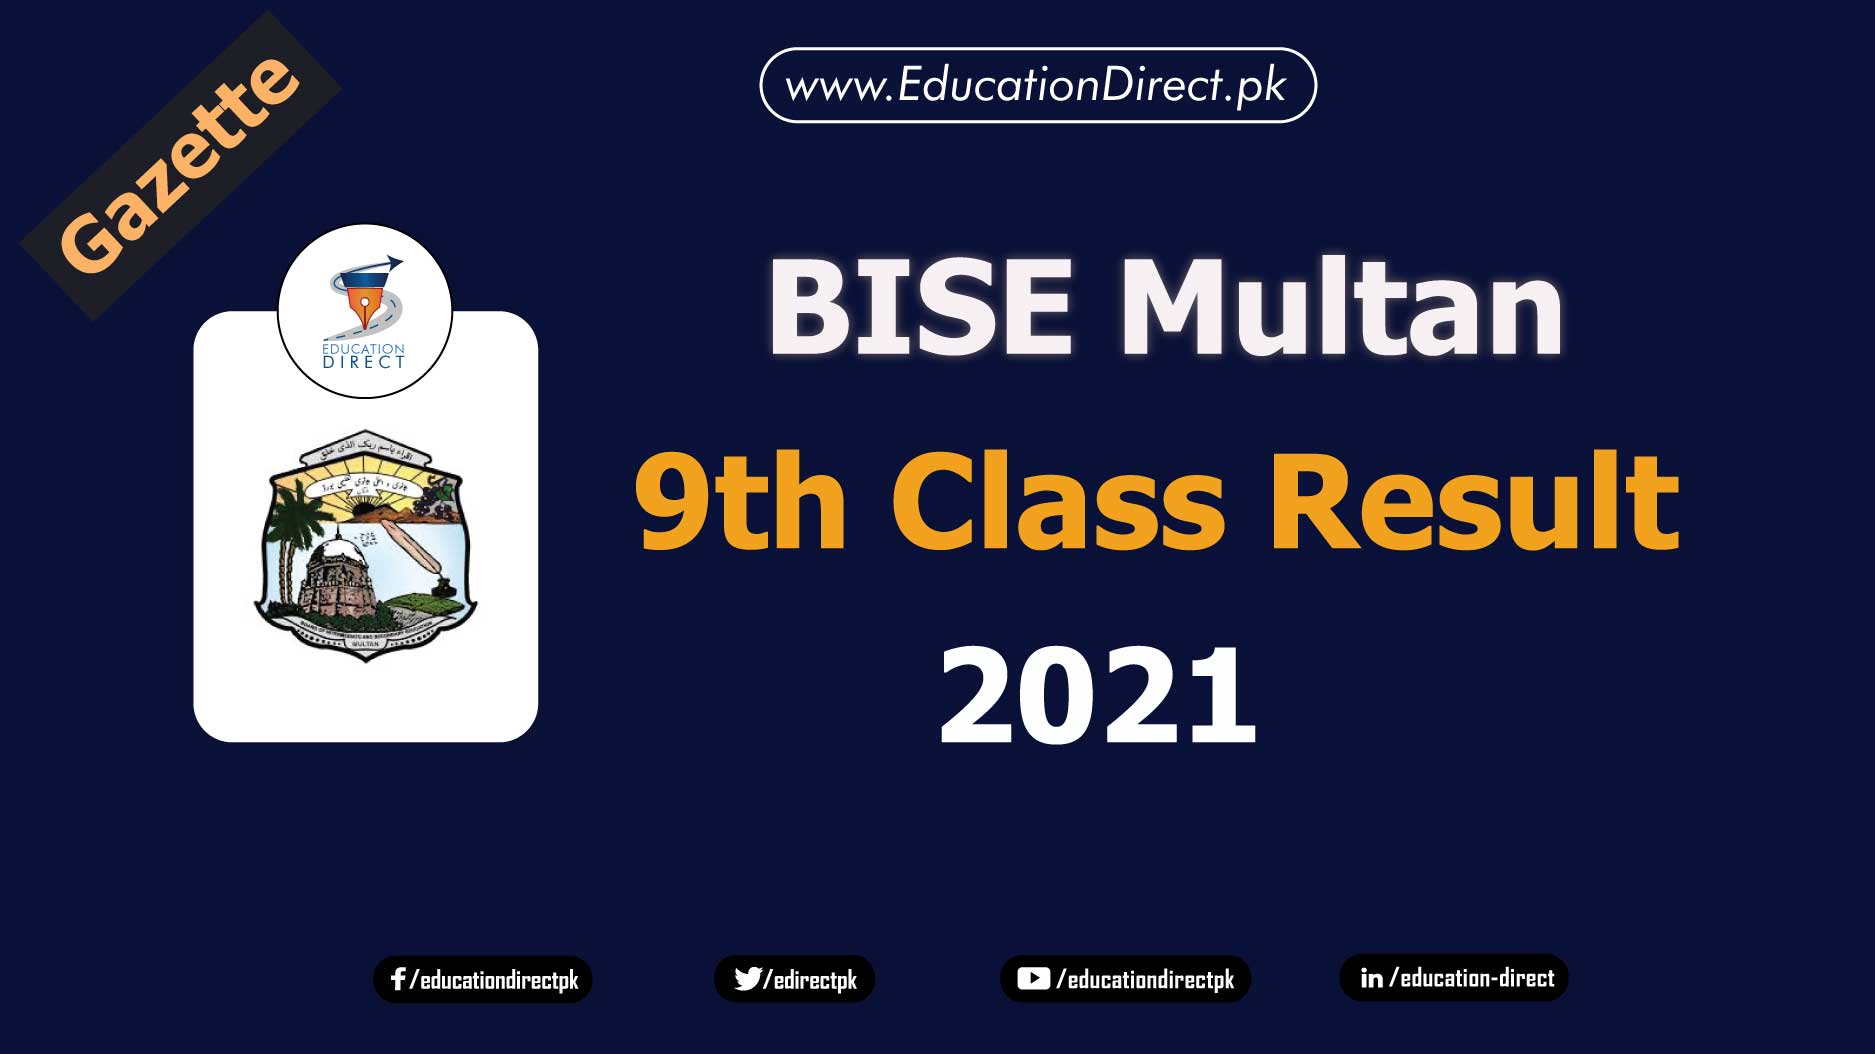 BISE Multan 9th Class Result 2021, Search by name, Download Result